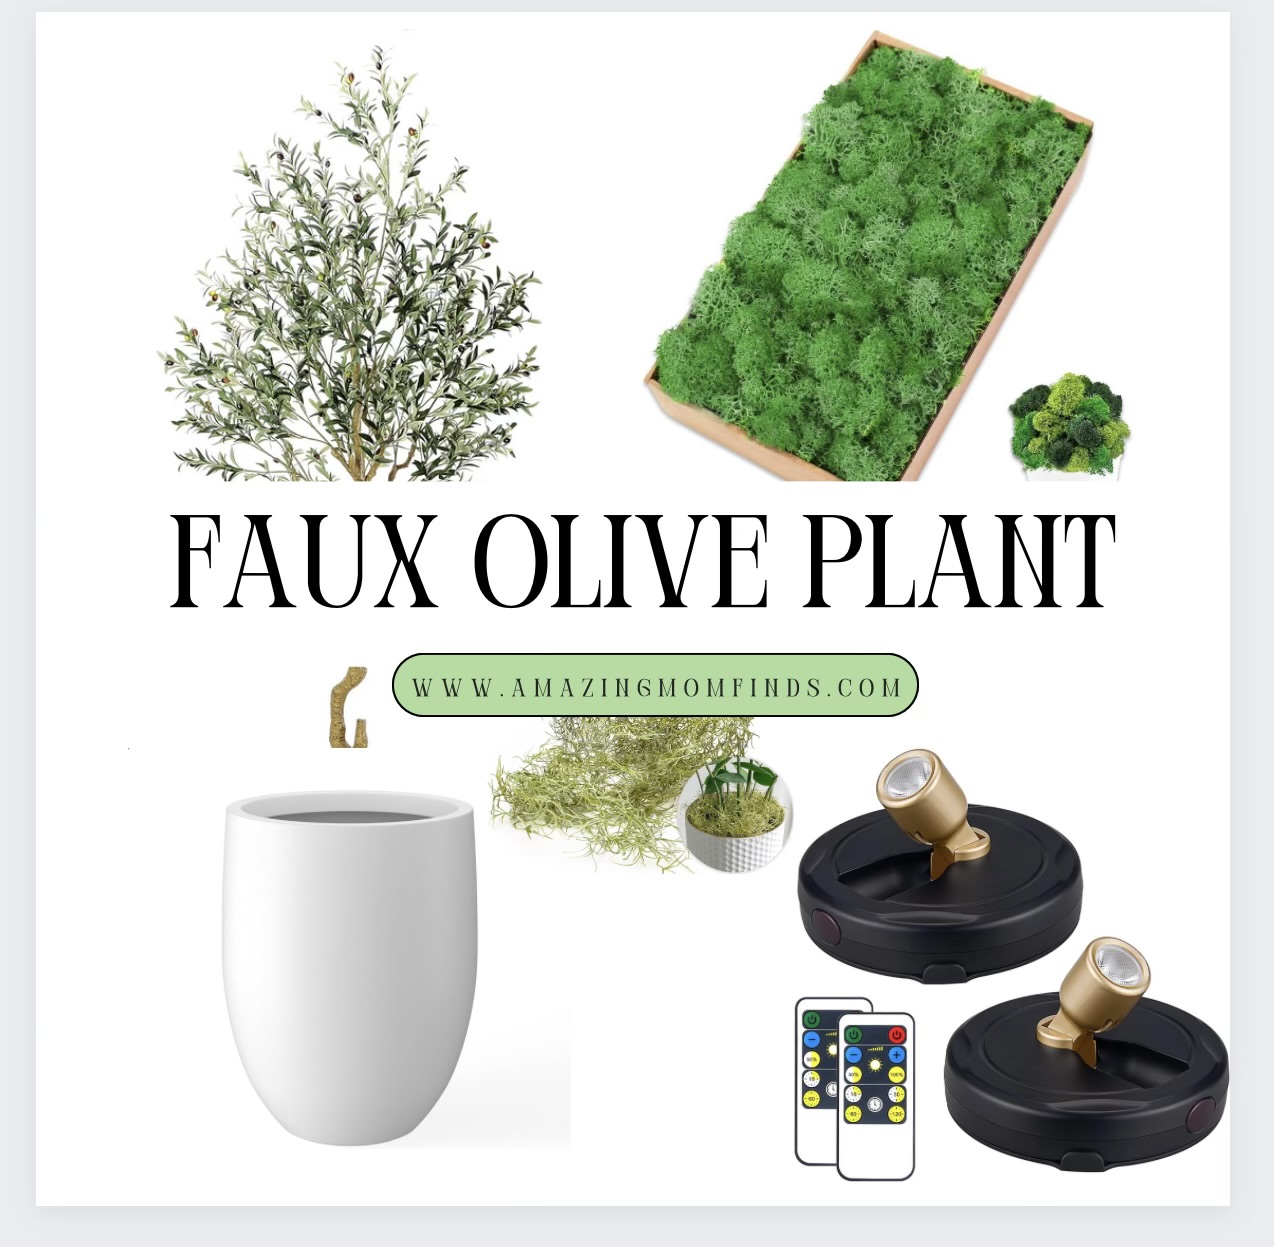 Amazon Home Finds – Faux Olive Plant